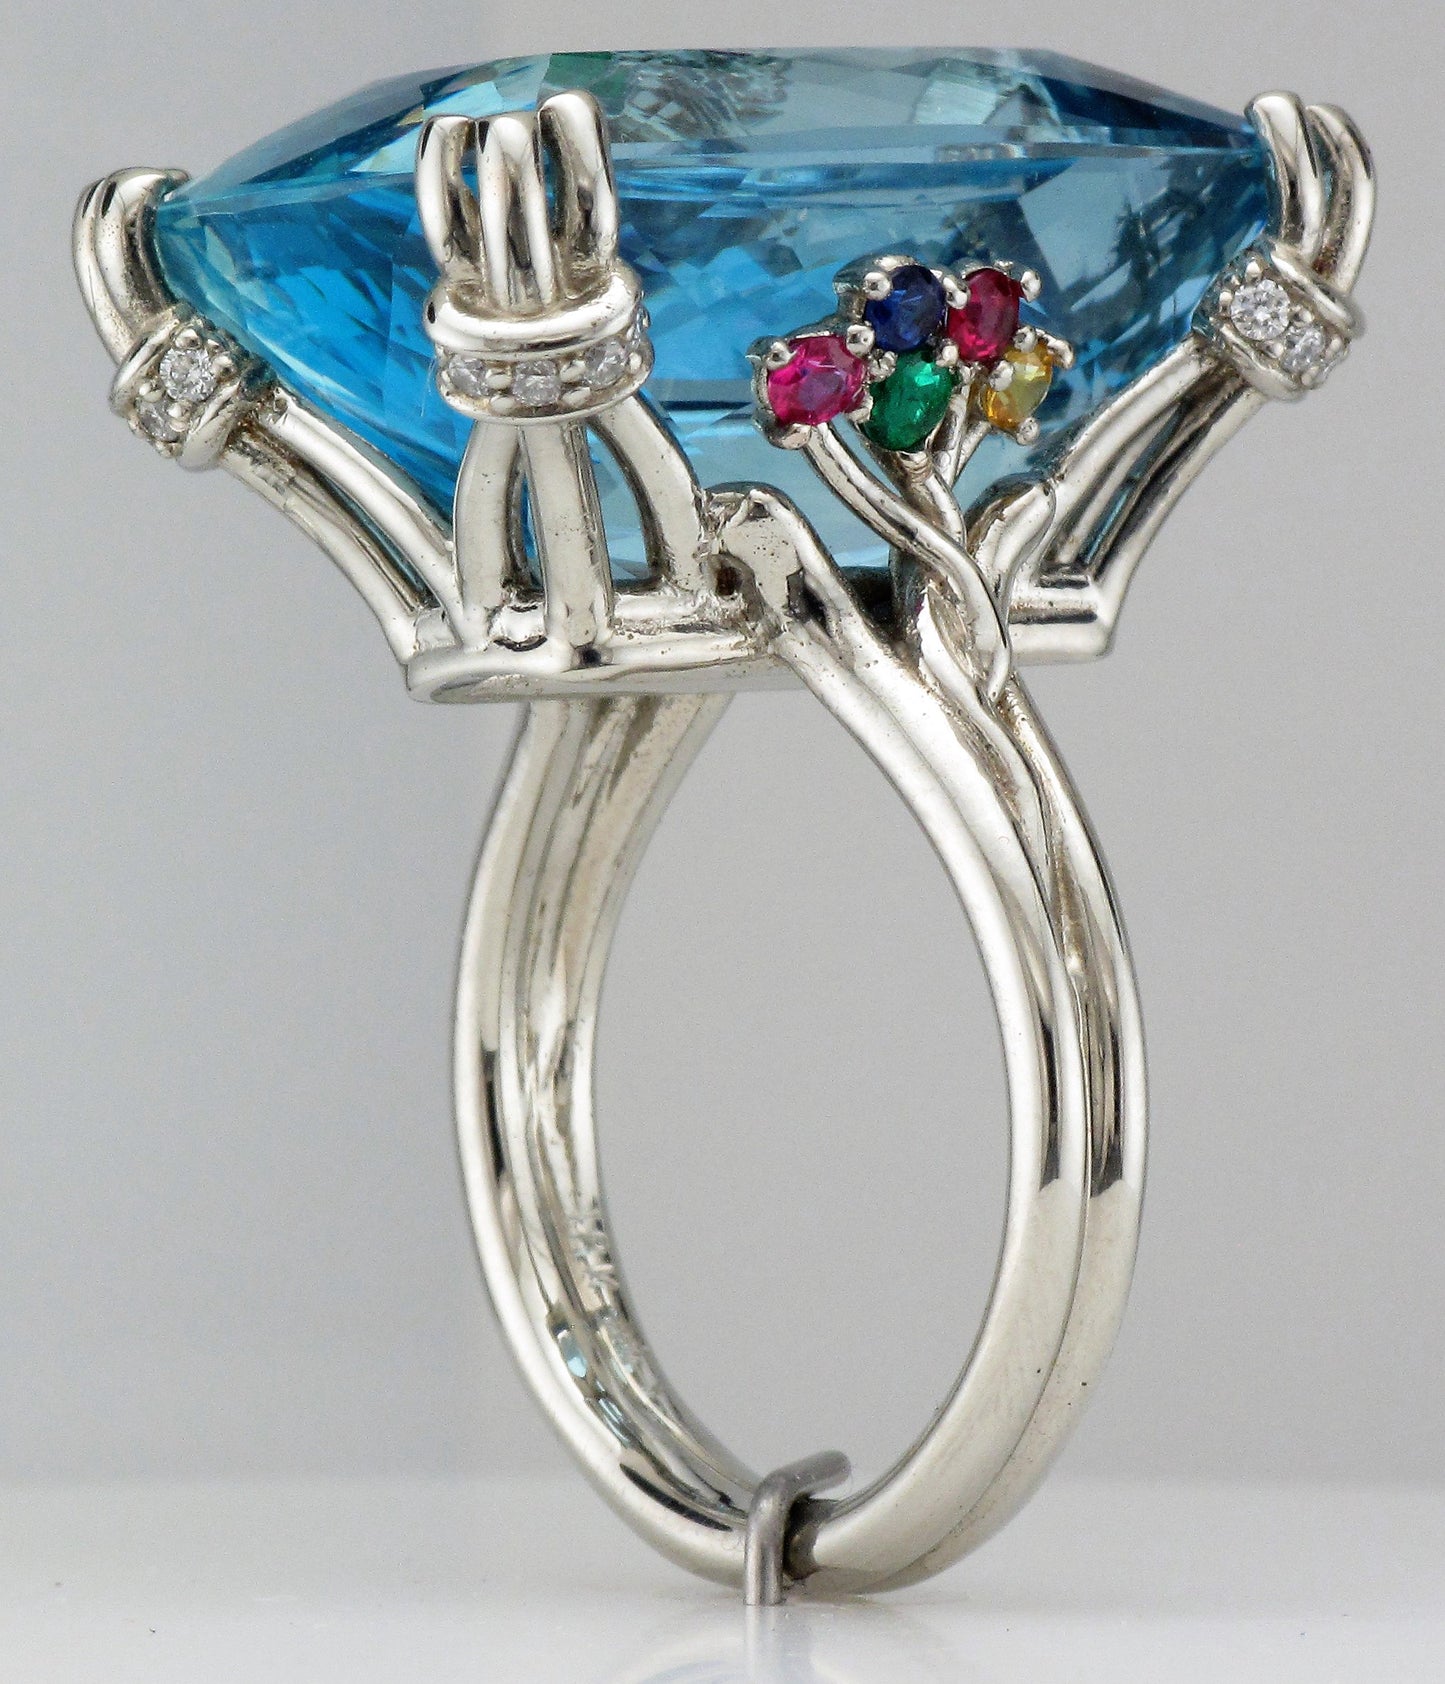 18KW Aquamarine Ring with Diamond, Sapphire, Ruby and Emerald Accents